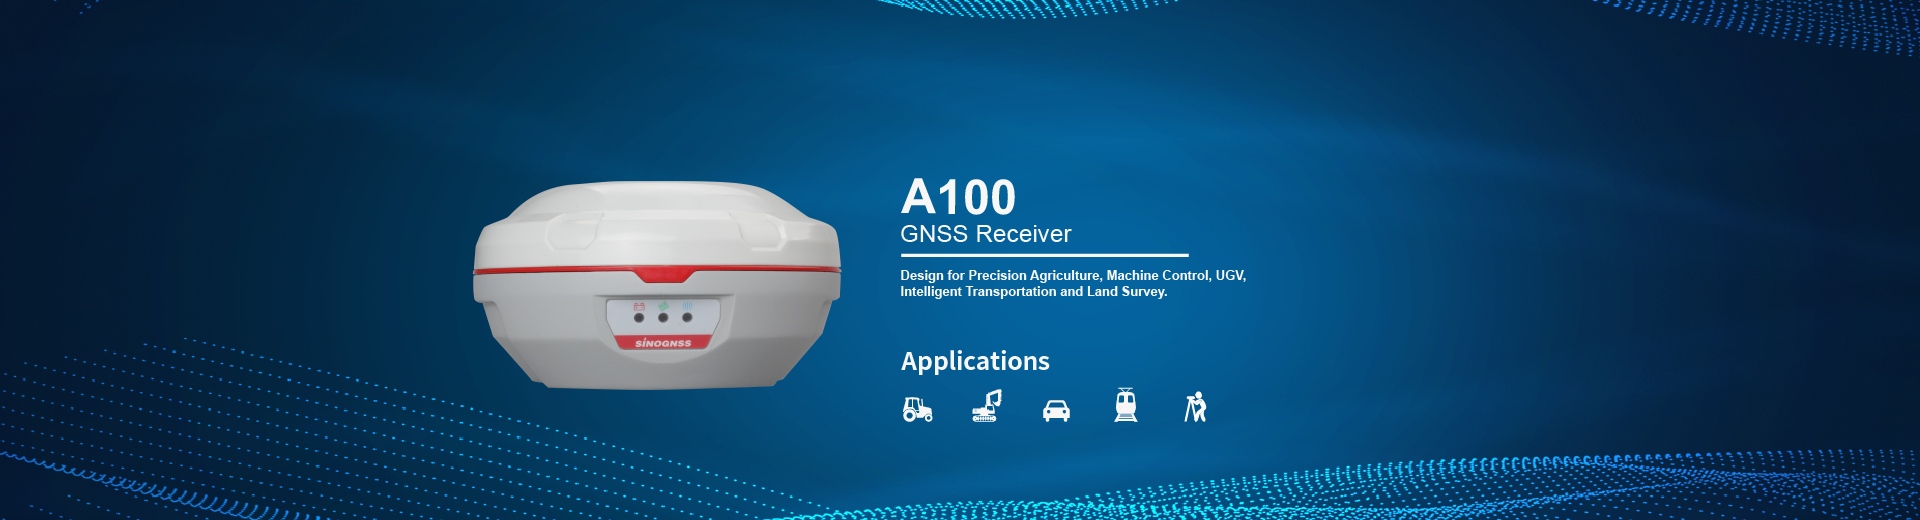 A100 GNSS Receiver